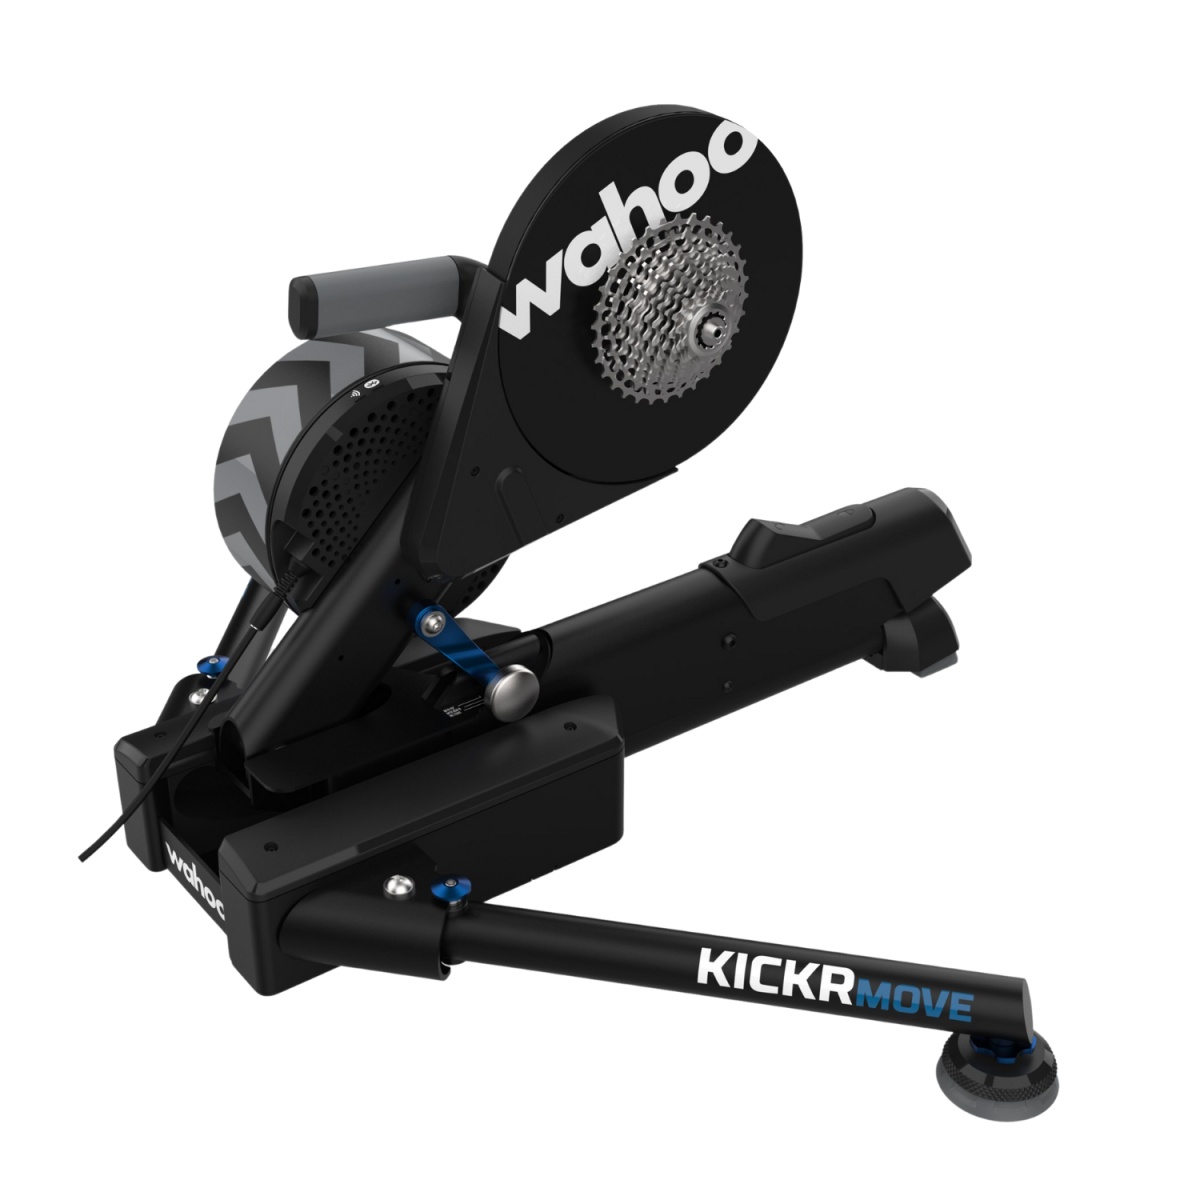 wahoo fitness kickr move bike trainer review